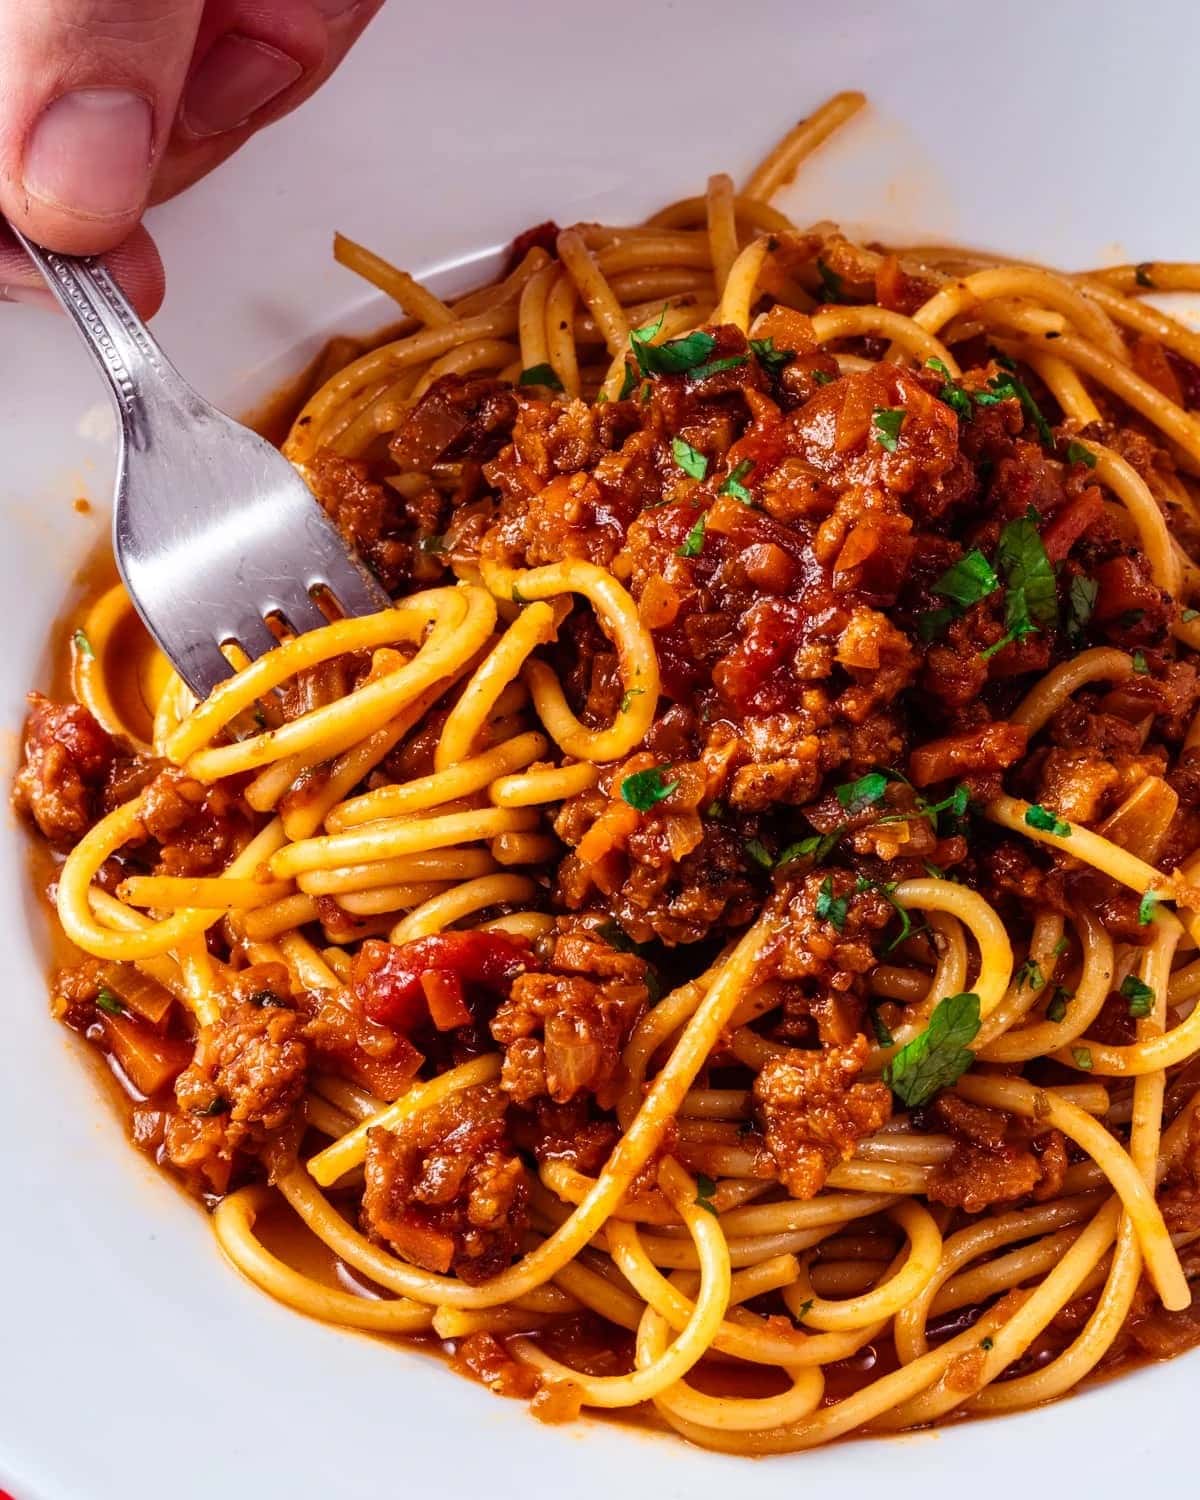 Fork tossing pasta with tomato sauce and Bolognese toppings.